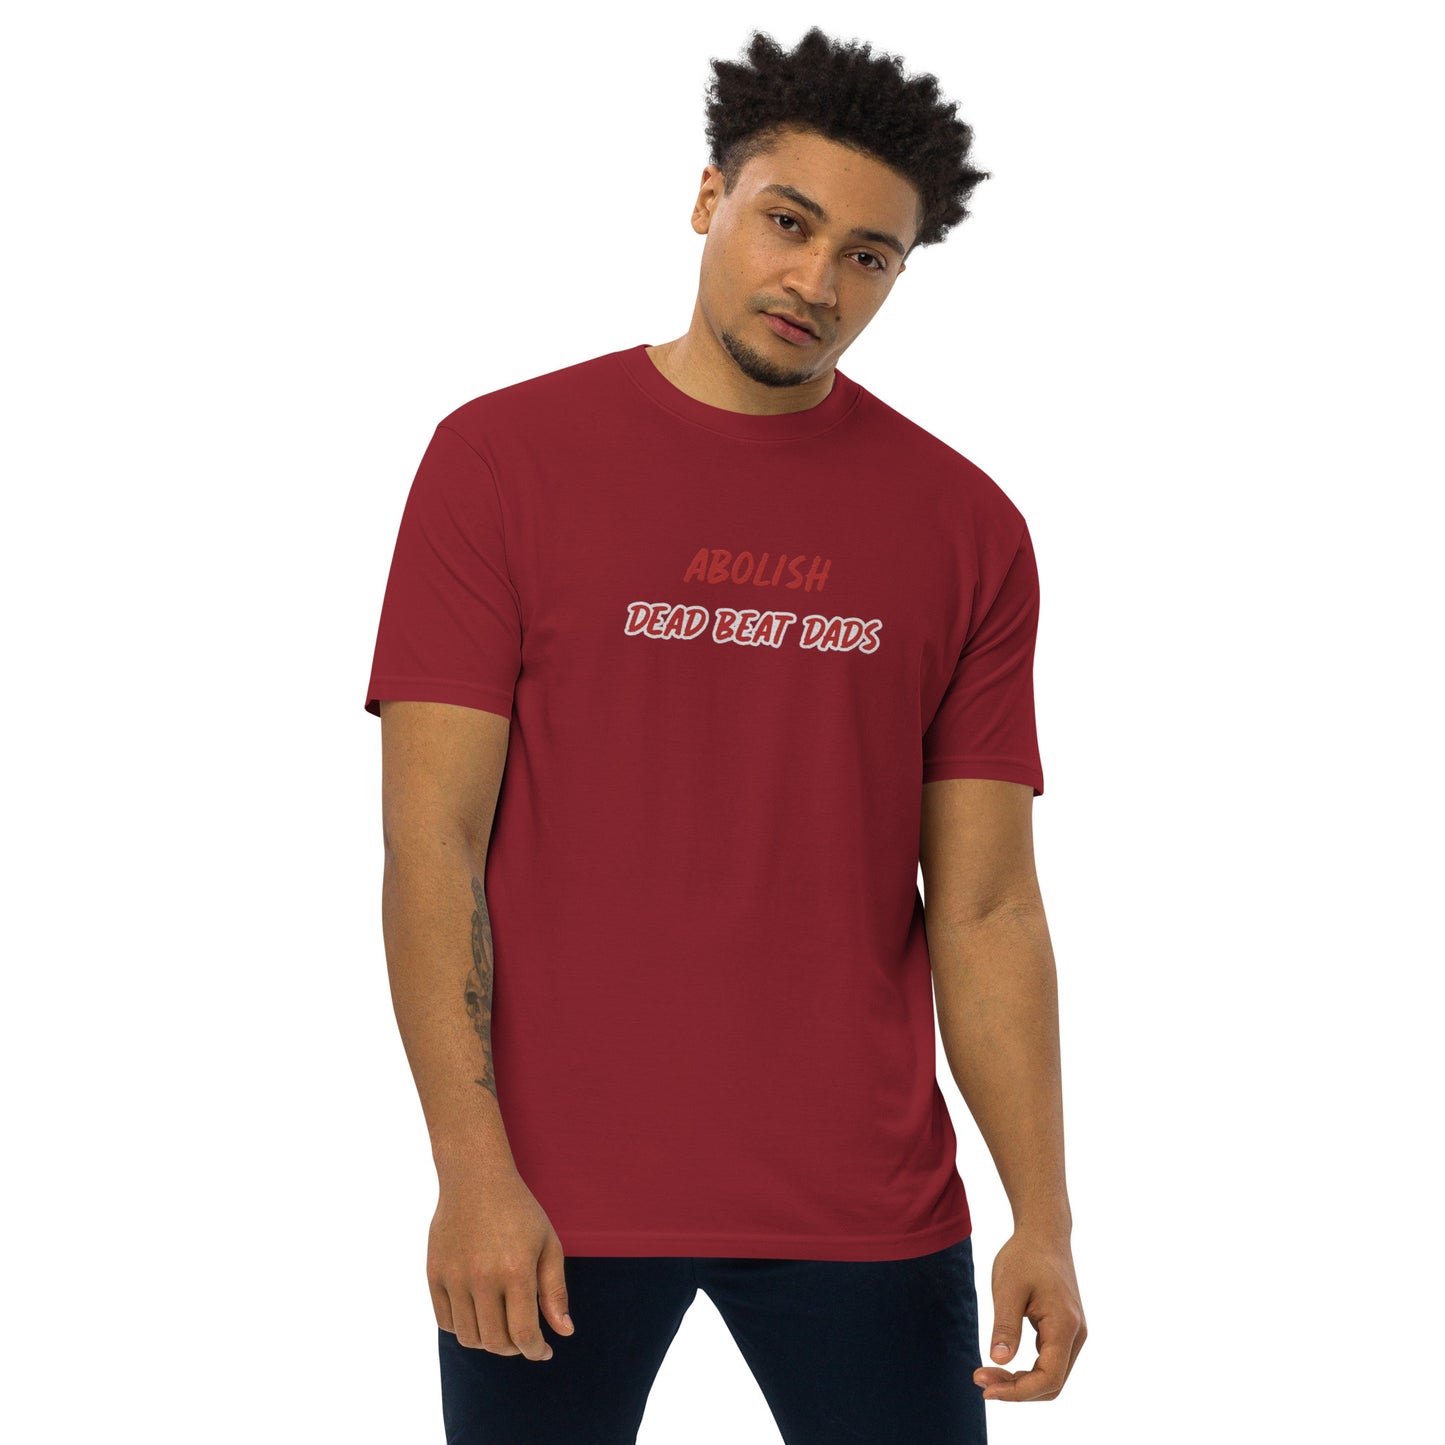 Abolish Dead Beat Dad's Embroidered Men's Heavyweight T-Shirt